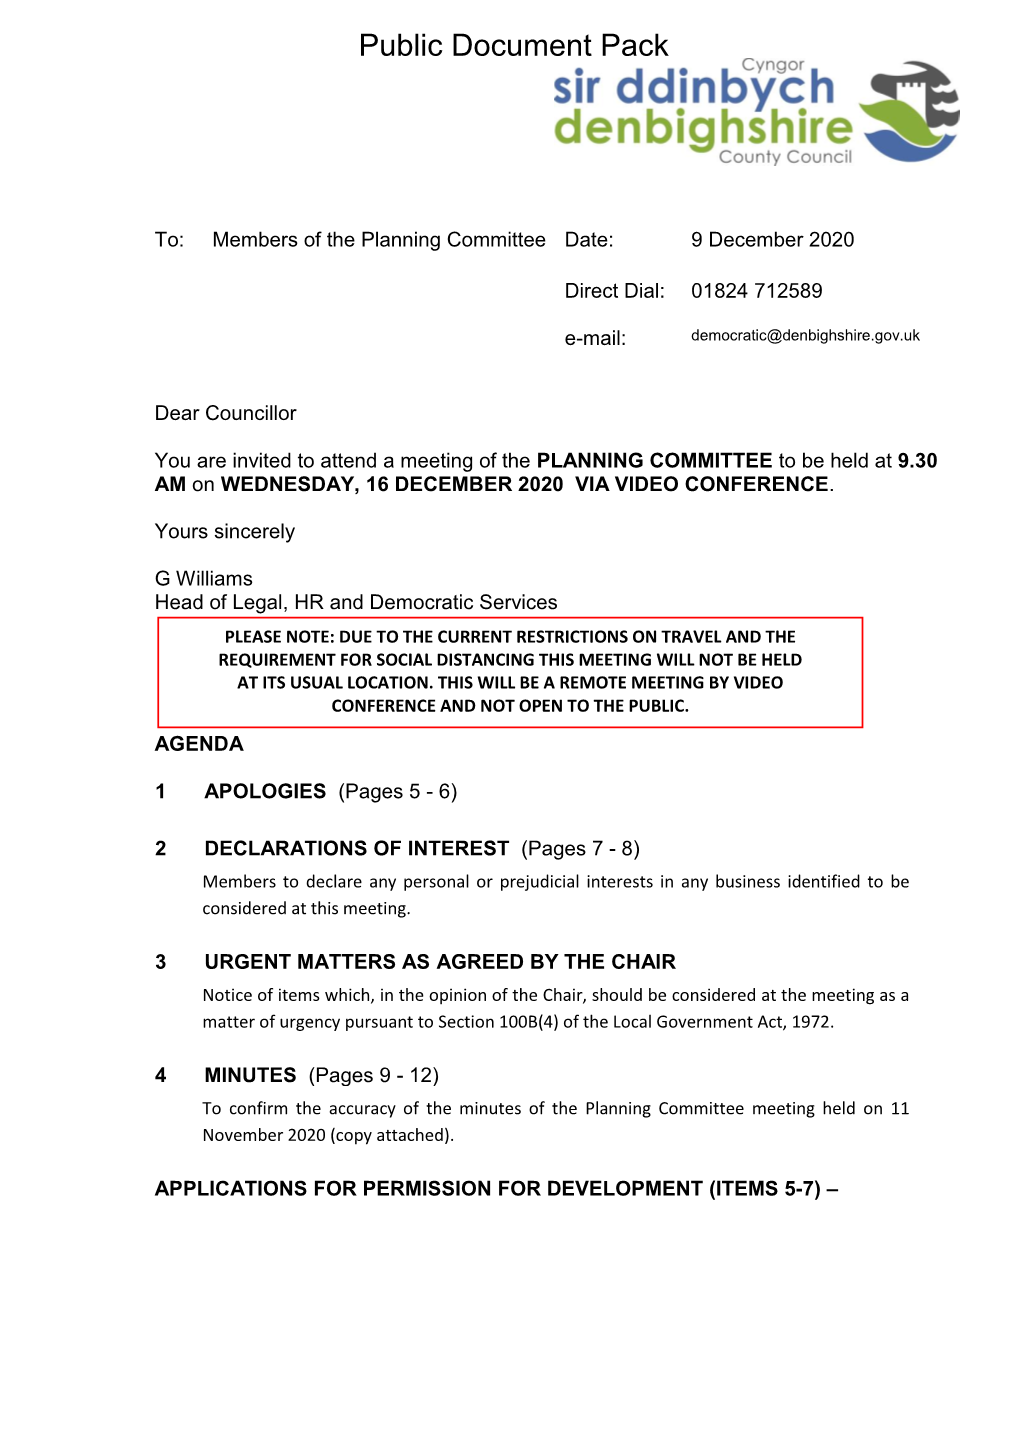 (Public Pack)Agenda Document for Planning Committee, 16/12/2020